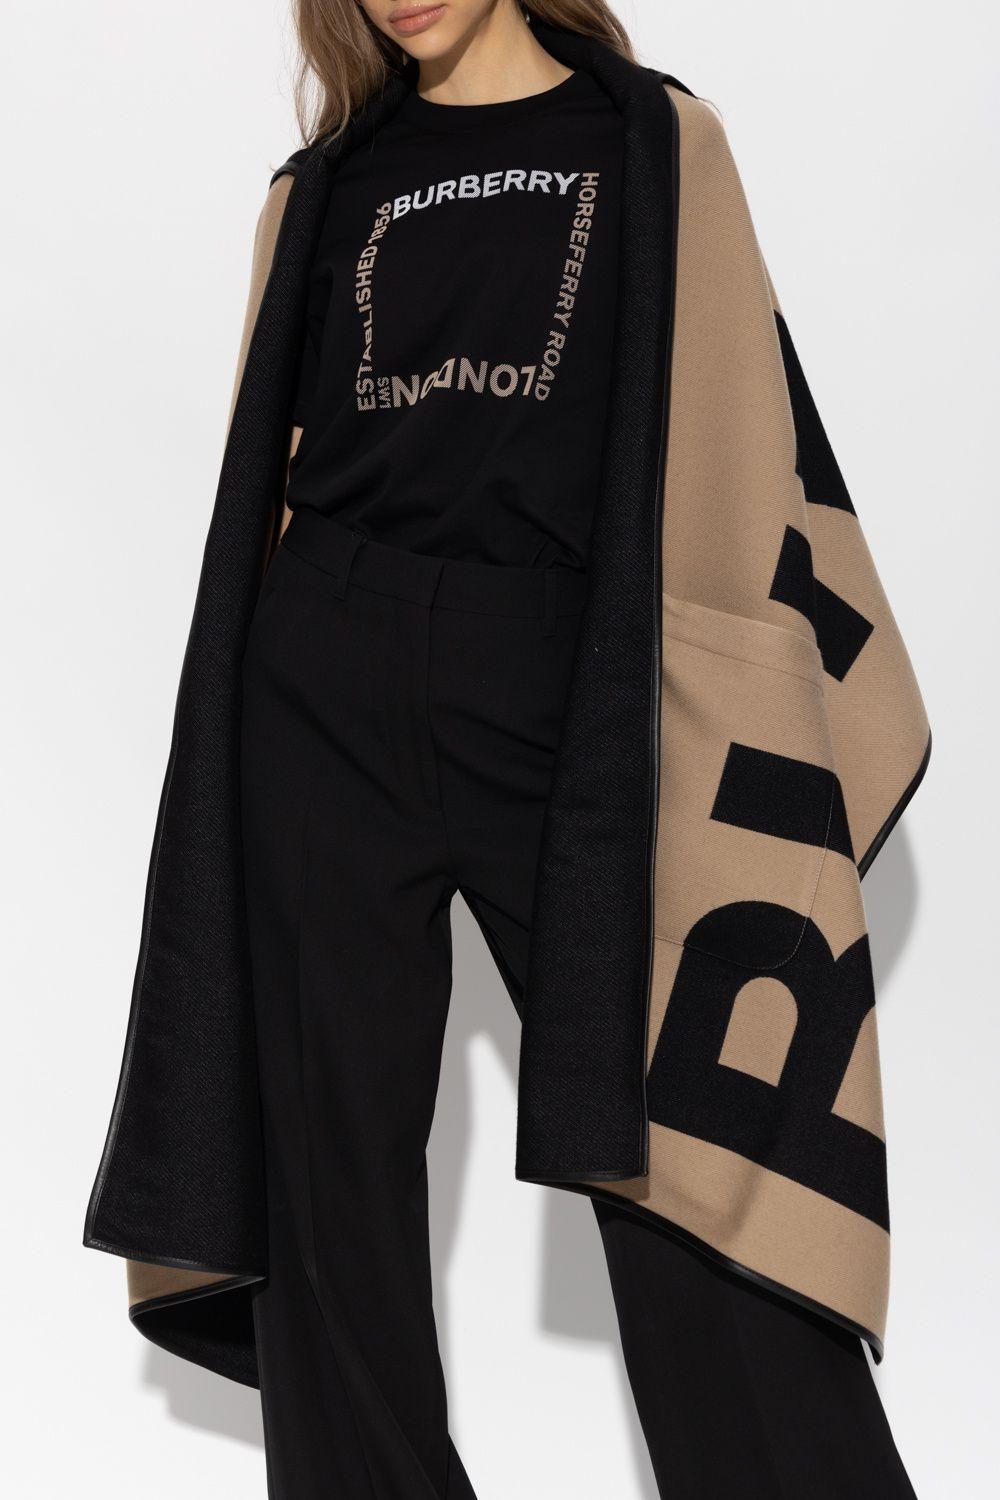 Burberry Hooded Poncho in Black | Lyst